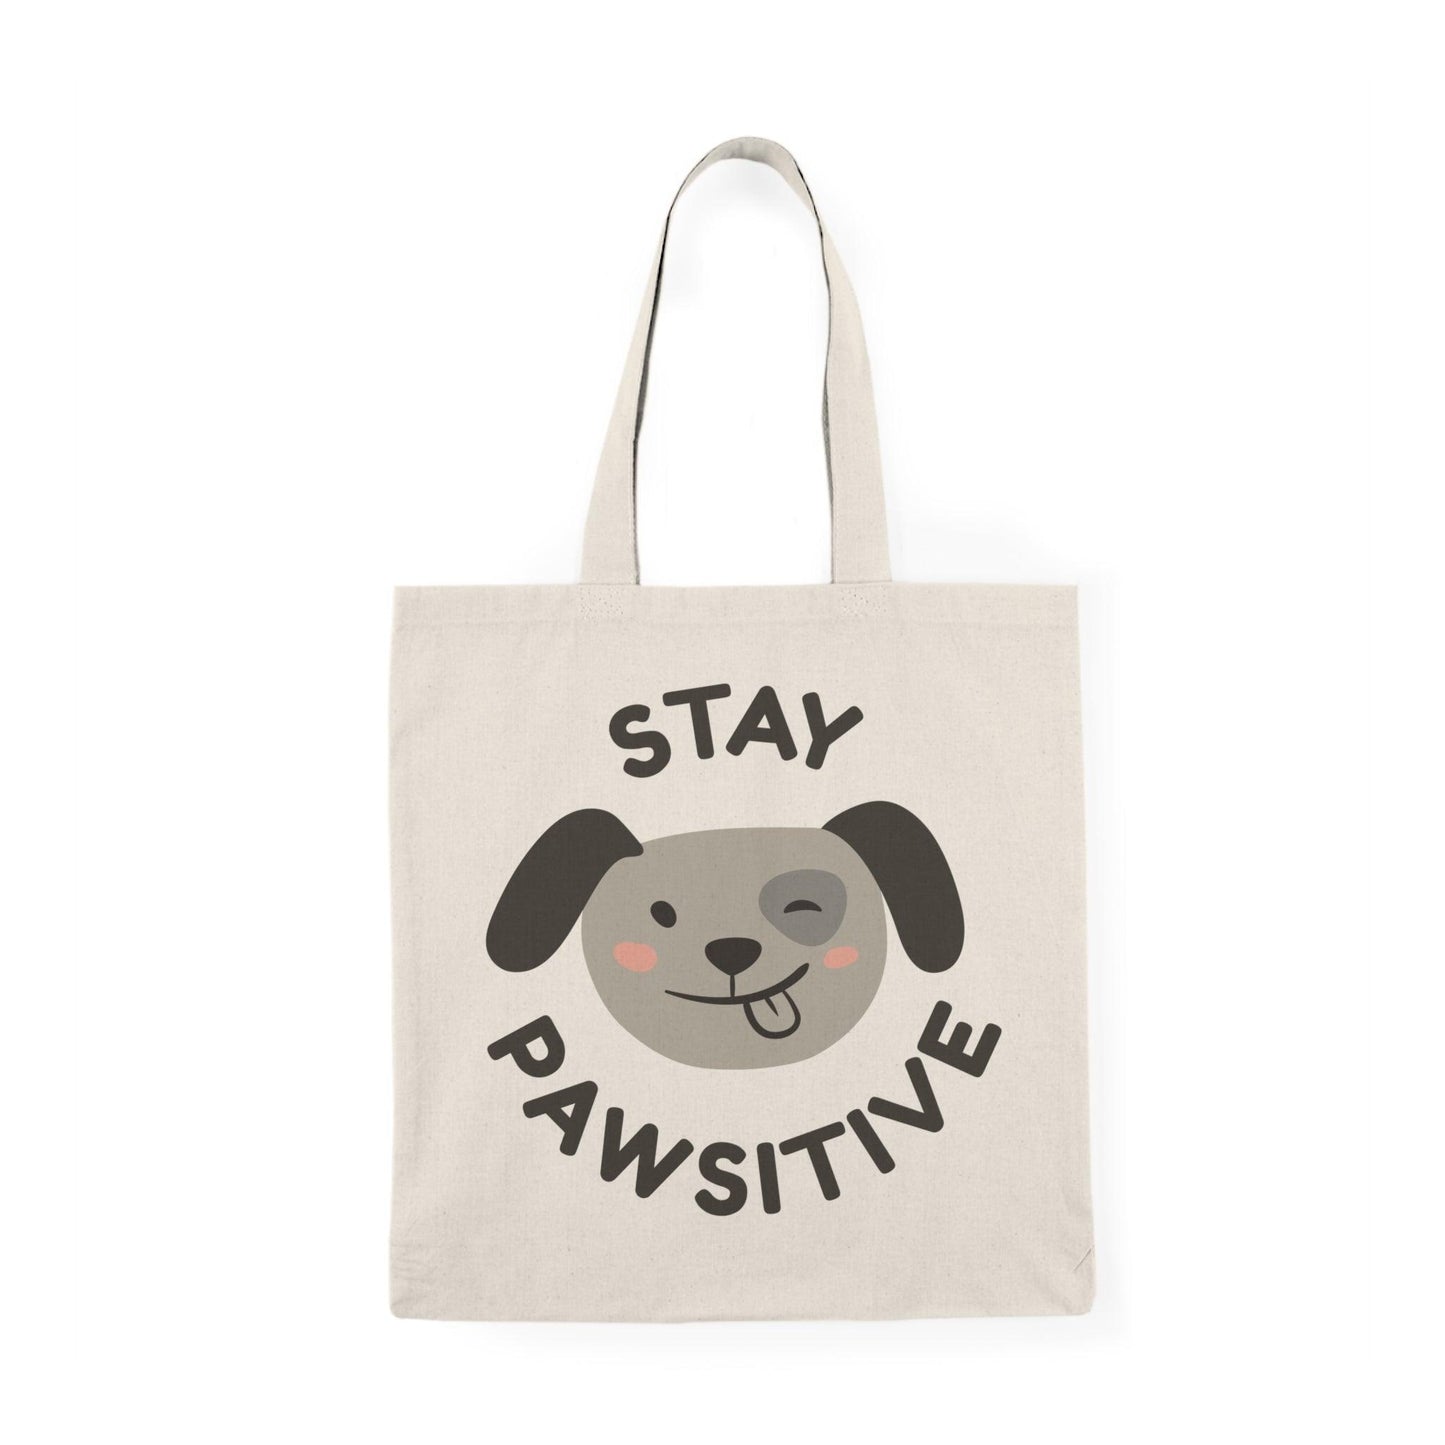 Stay Pawsitive Natural Tote Bag with Funny Dog Graphic - Lizard Vigilante